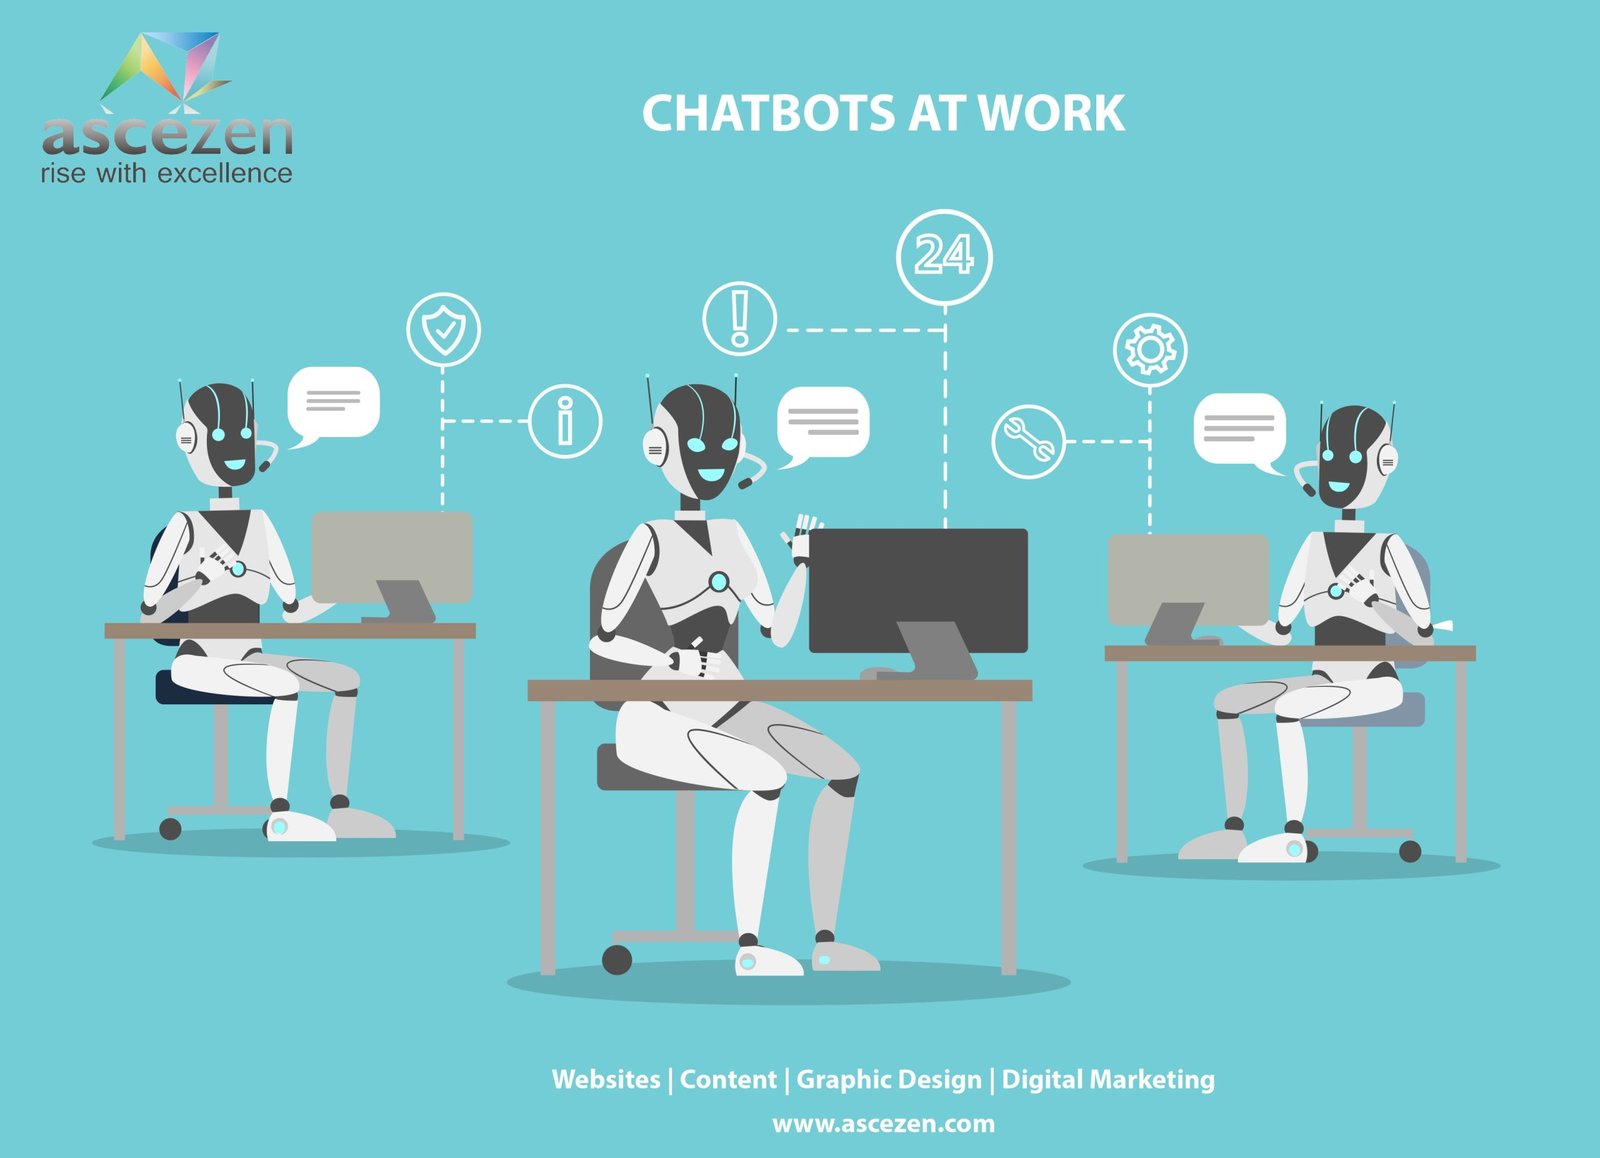 Pic shows Chatbots or robots chatting on desktops. Content for chatbots is created by Ascezen Consulting Lucknow India